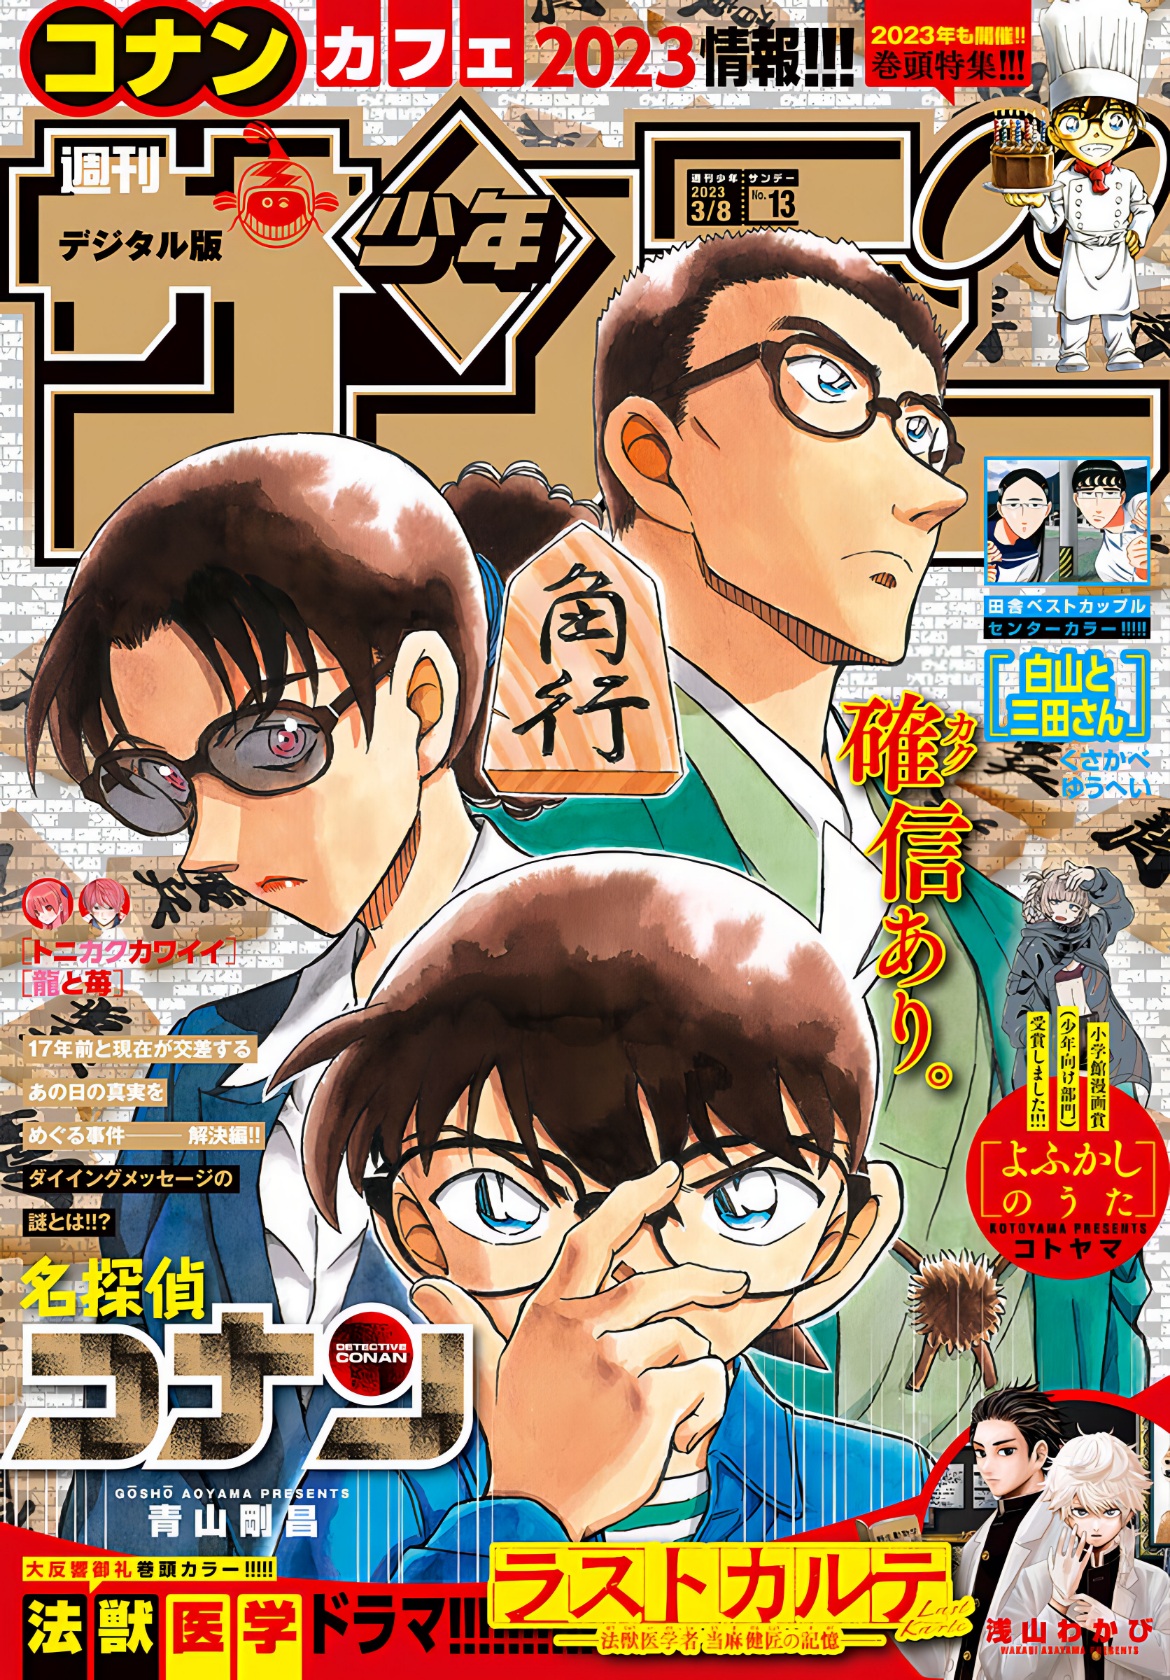 Detective Conan: Chapter 1109 - Page 1